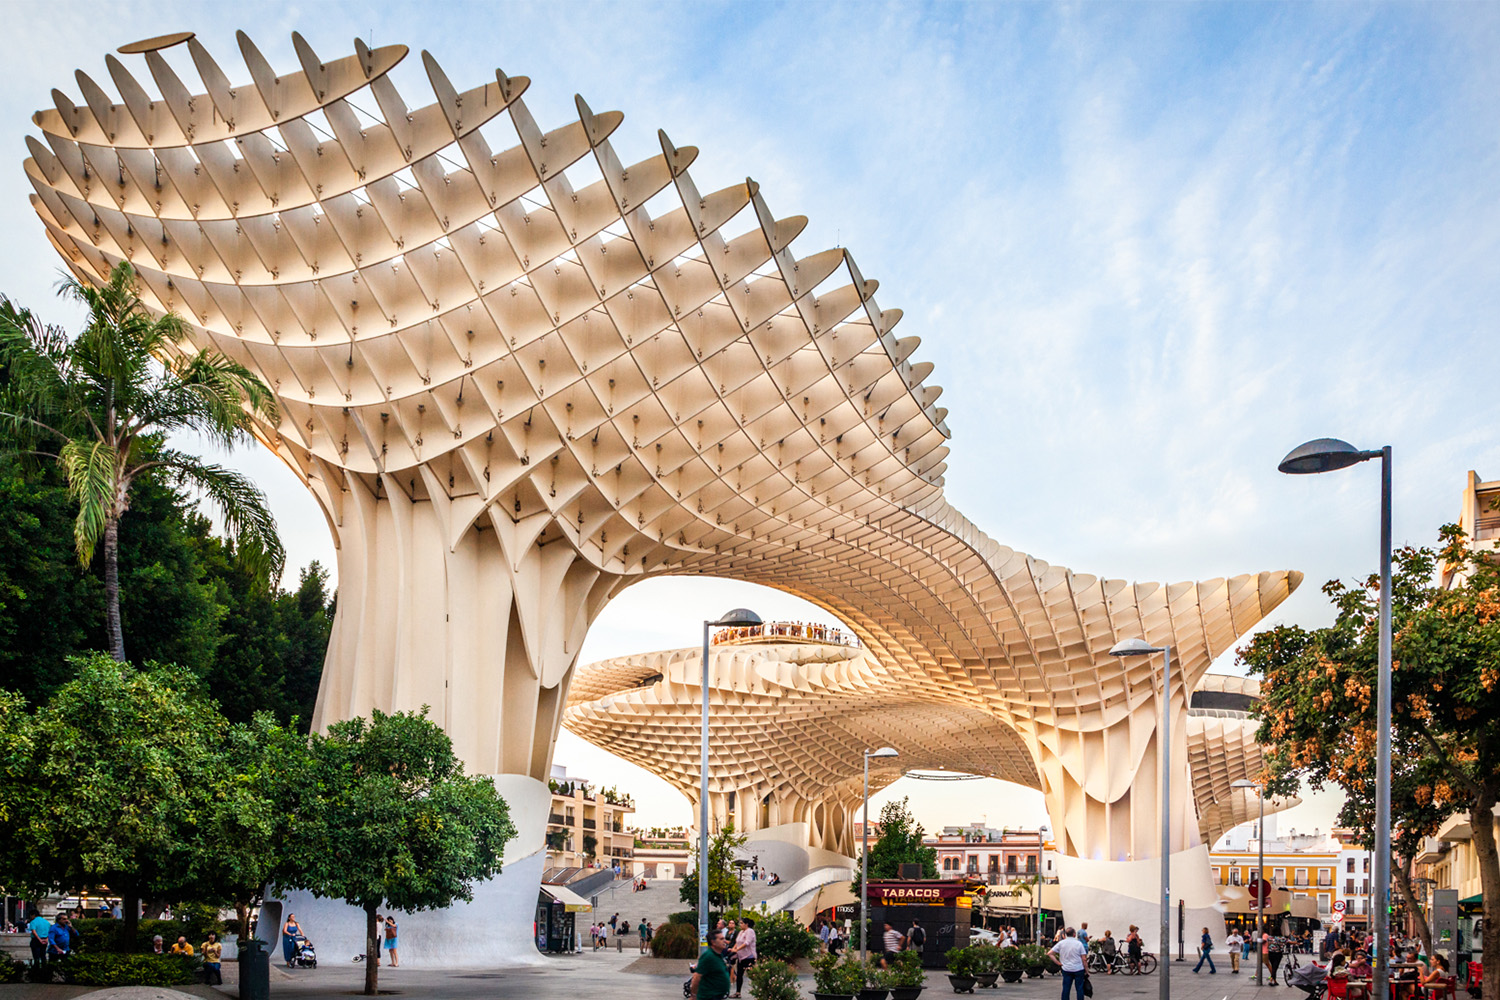 Metropol Parasol - the largest wooden structure in the world